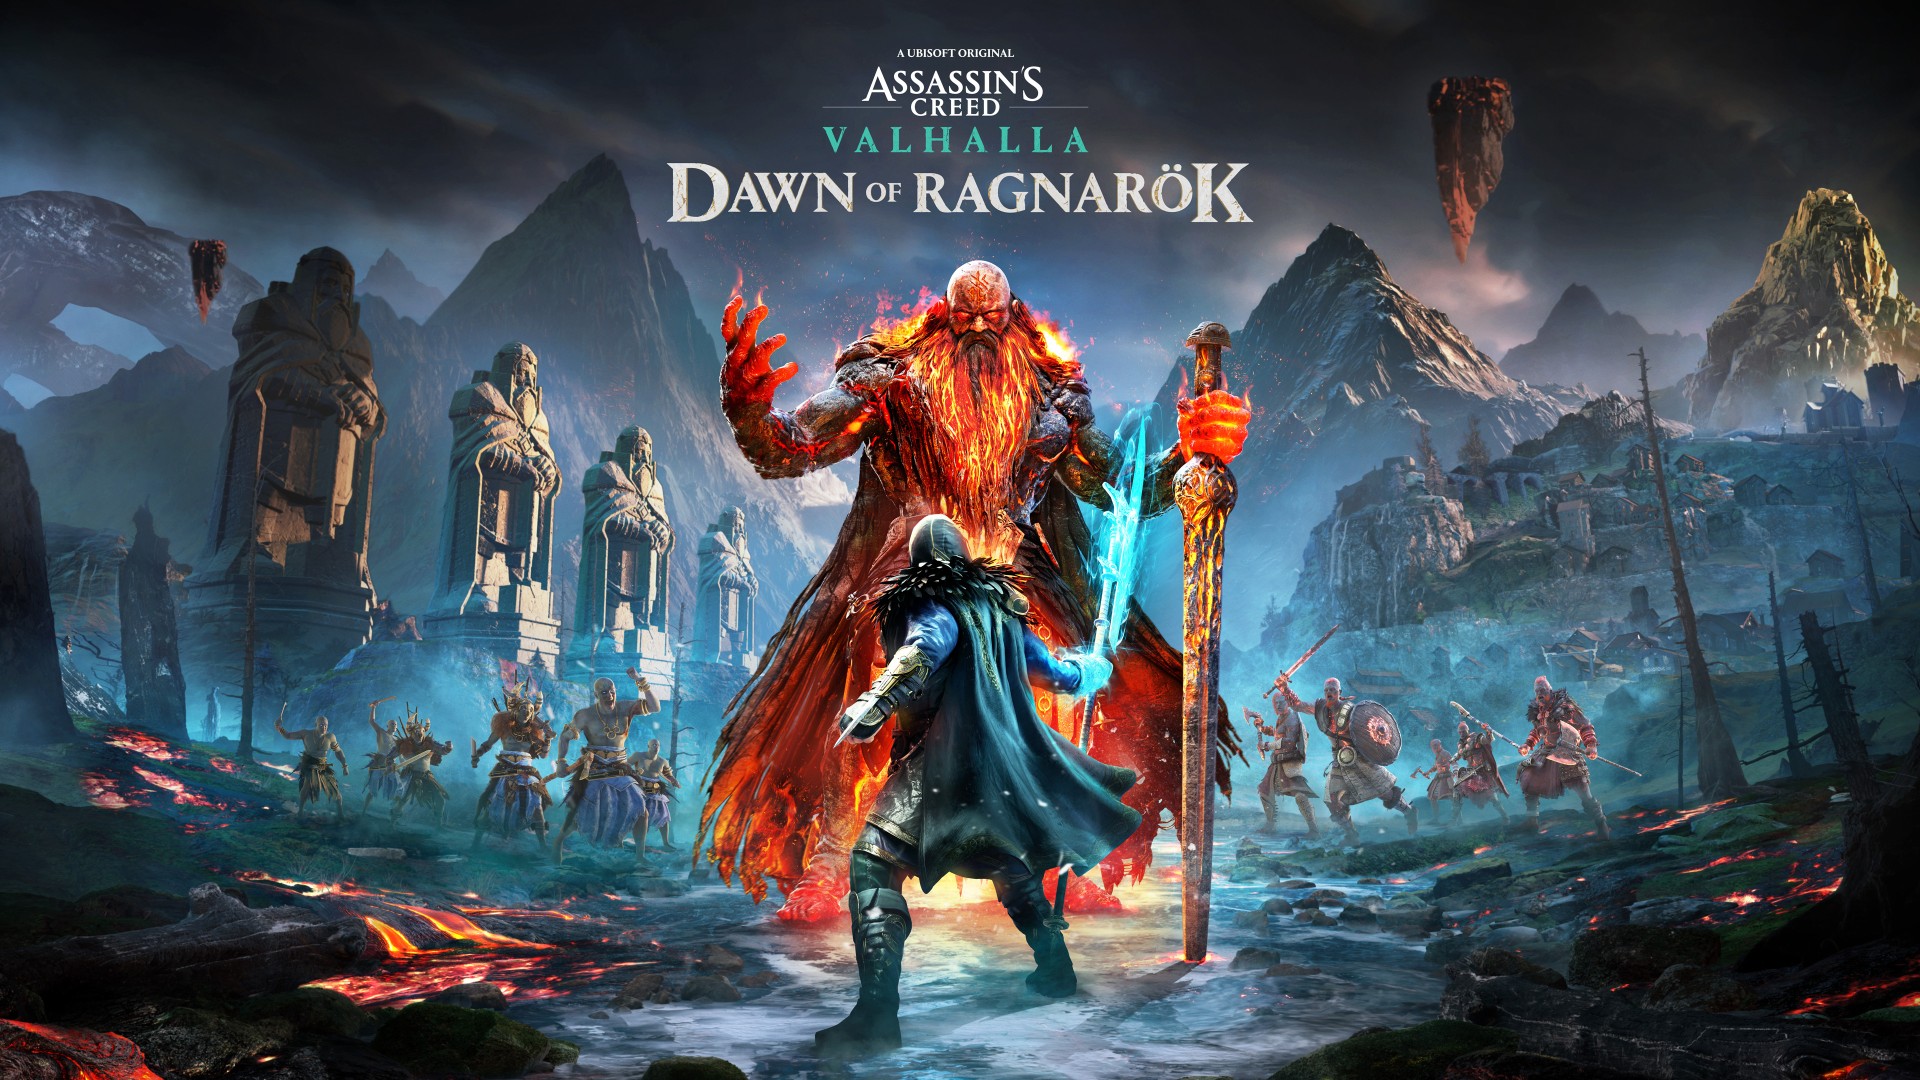 Dawn of Ragnarök, Assassin’s Creed Valhalla’s Third Expansion Kicks Off Year 2 of Post Launch Today